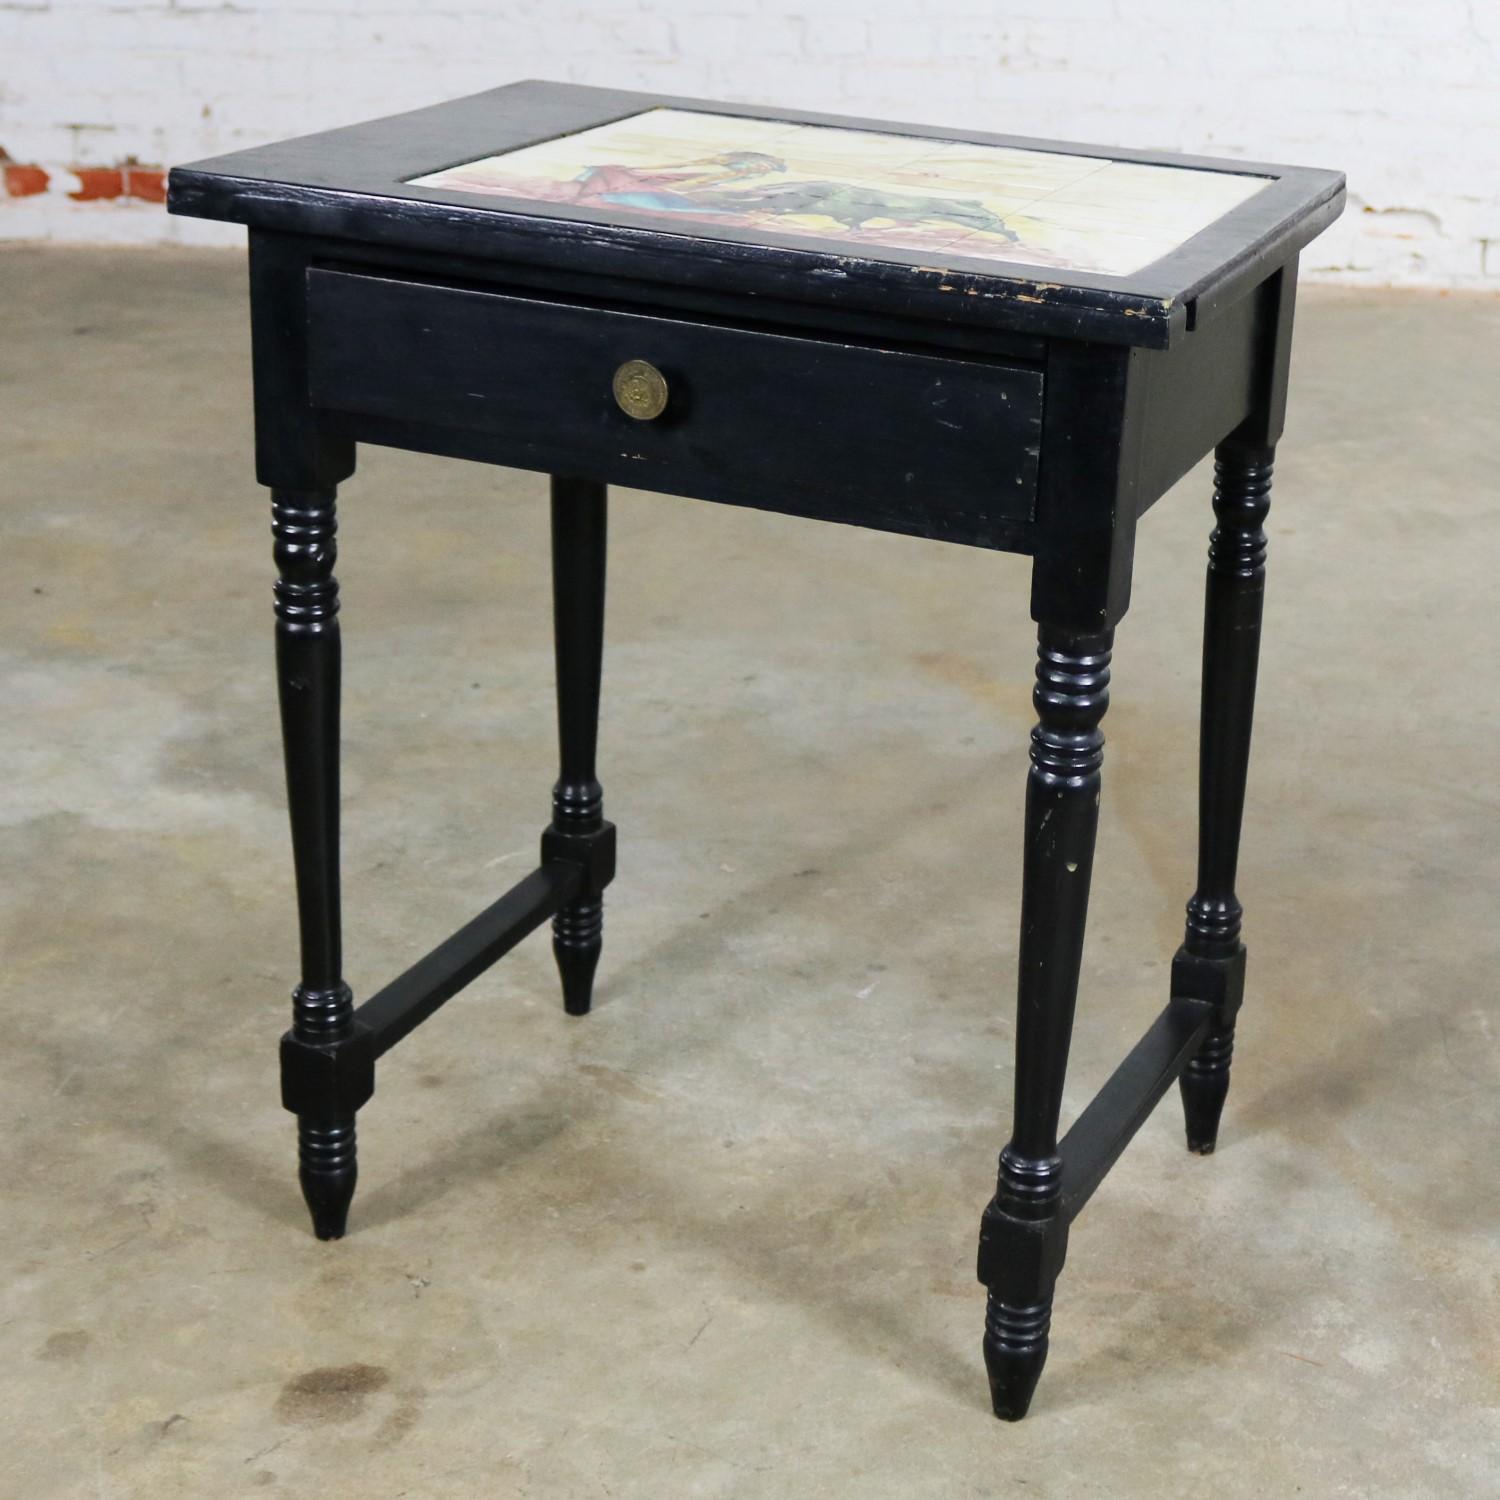 Spanish Colonial Vintage Mexican Black Turned Leg Drawered End Table Matador & Bull Tile Top For Sale